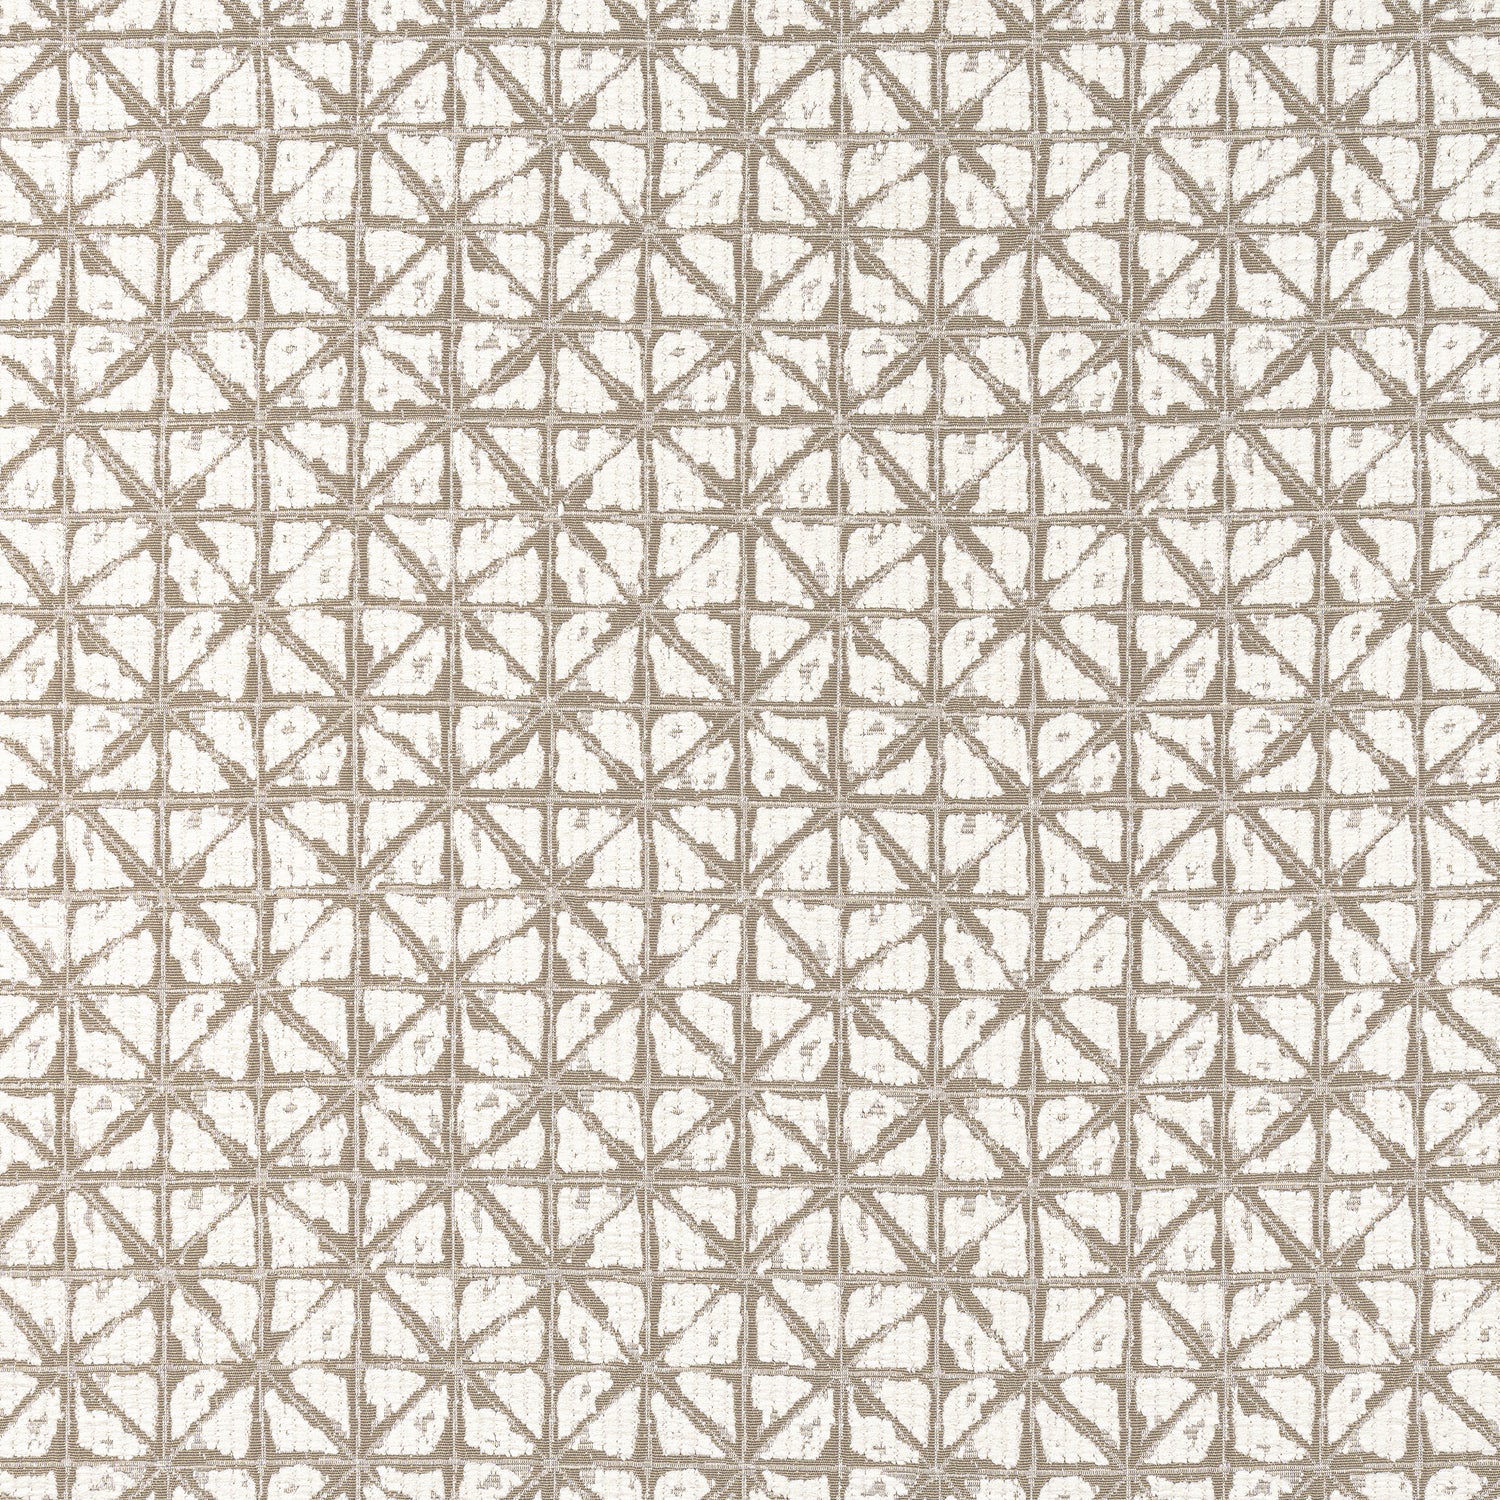 Soren fabric in mocha color - pattern number W8740 - by Thibaut in the Haven collection